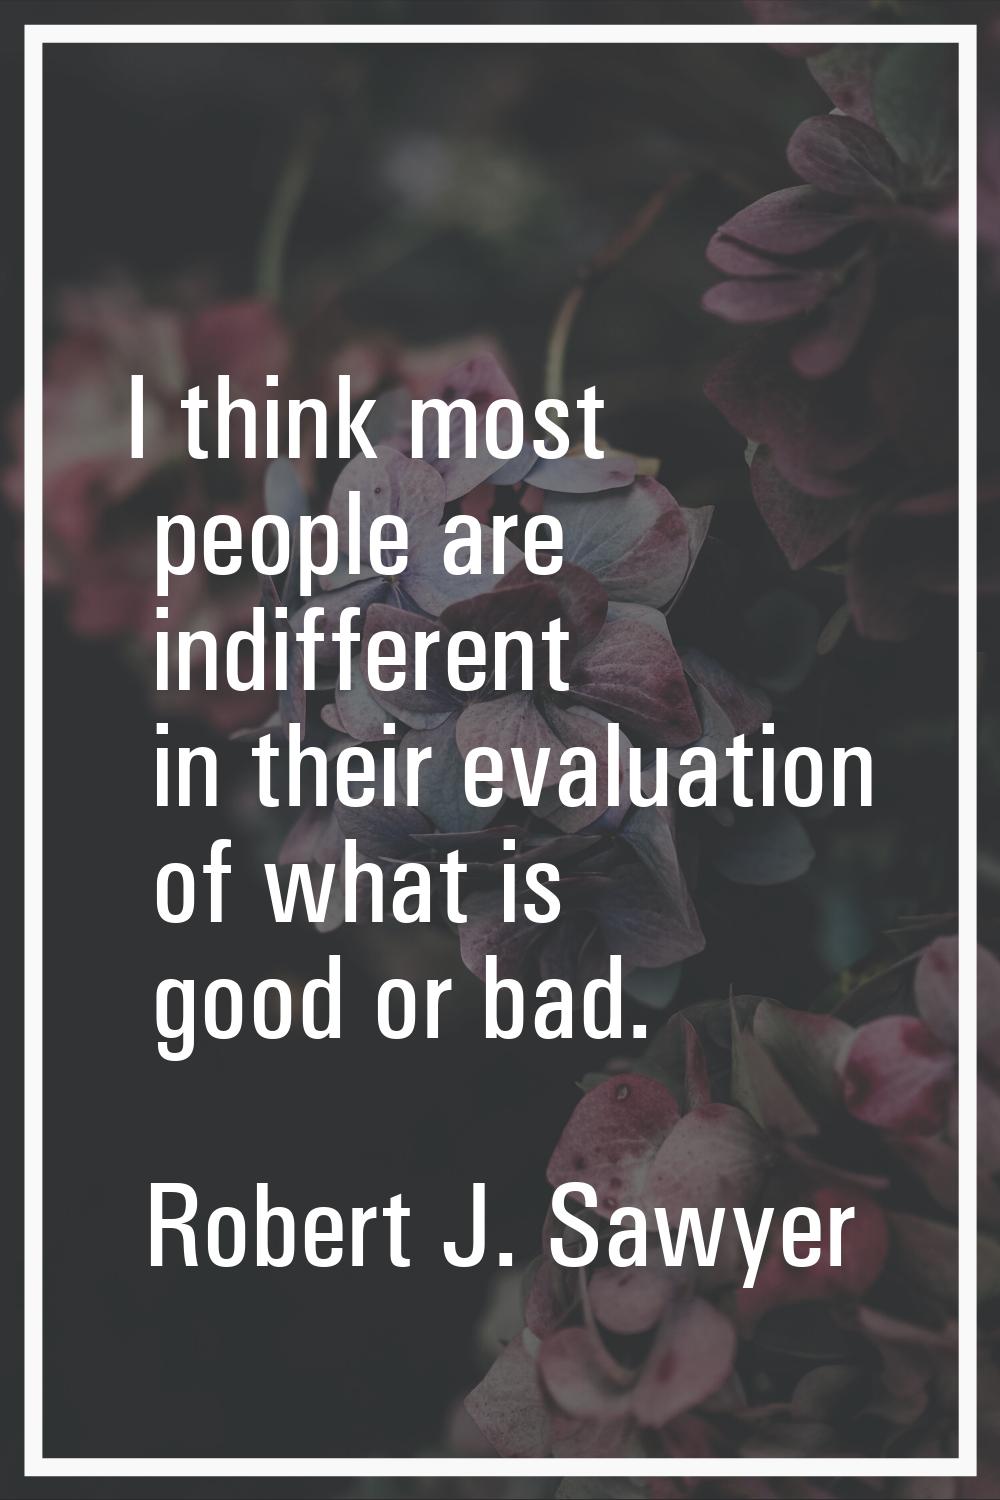 I think most people are indifferent in their evaluation of what is good or bad.